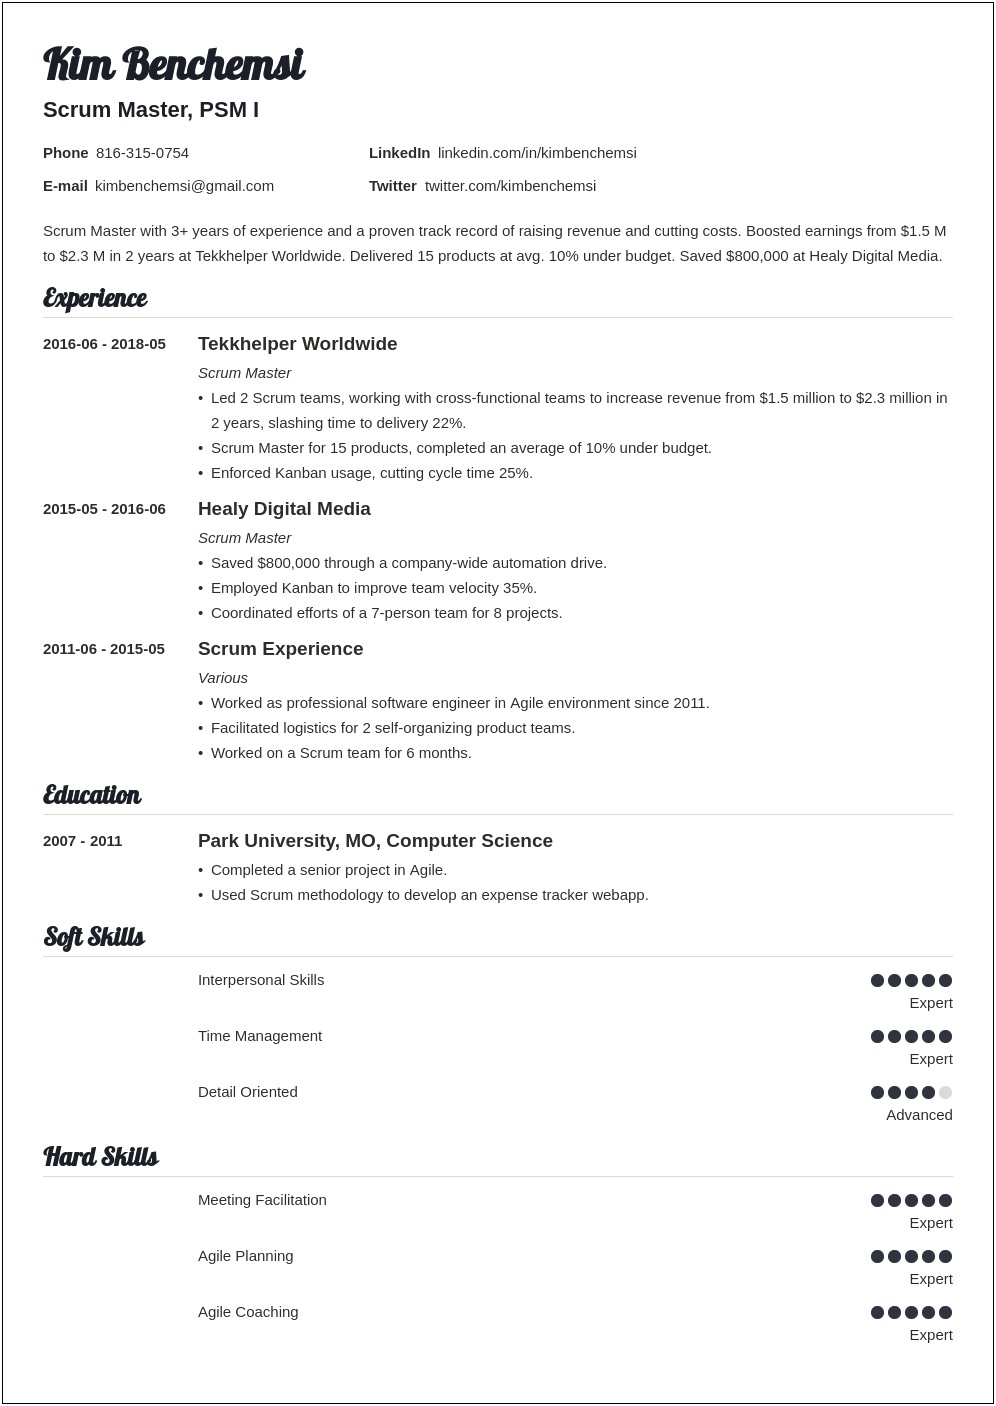 Sample Scrum Resume With Experience